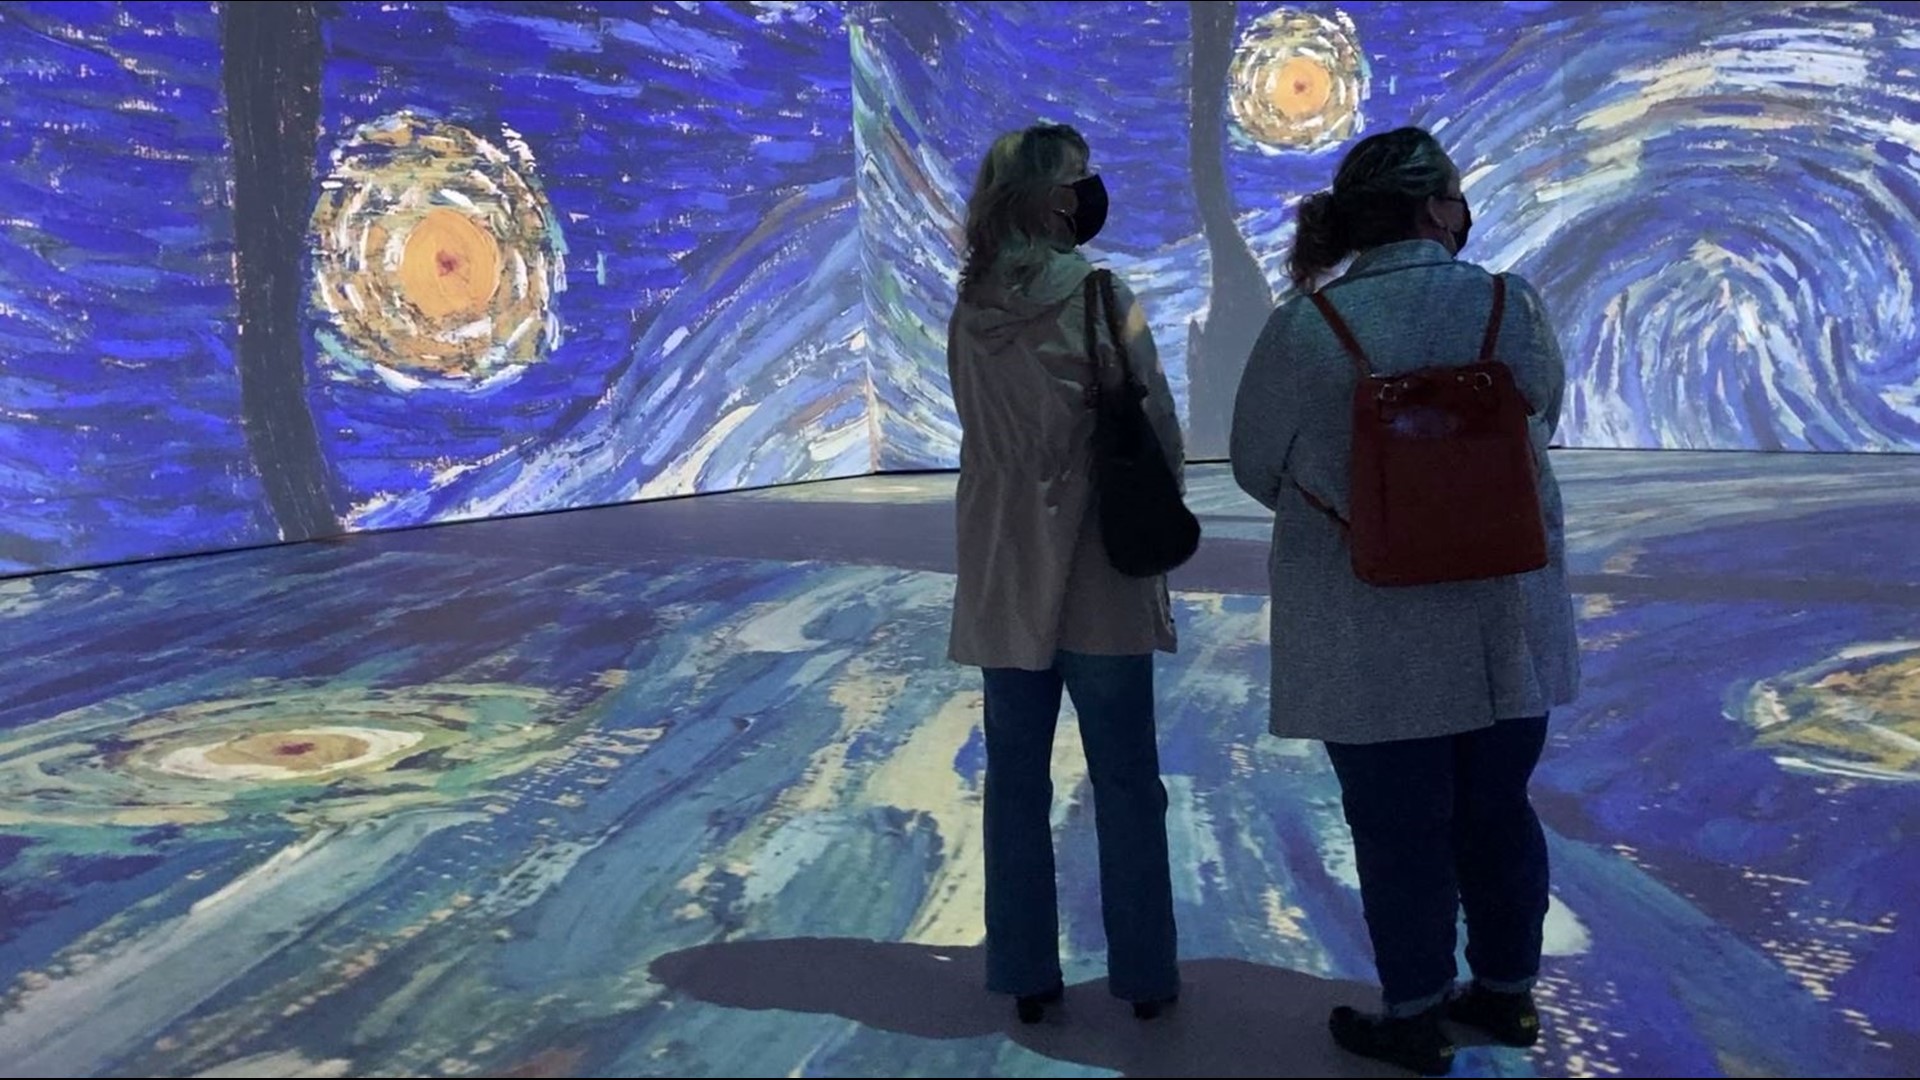 Imagine Van Gogh: The Immersive Exhibition runs at the Tacoma Armory through mid-April. #k5evening